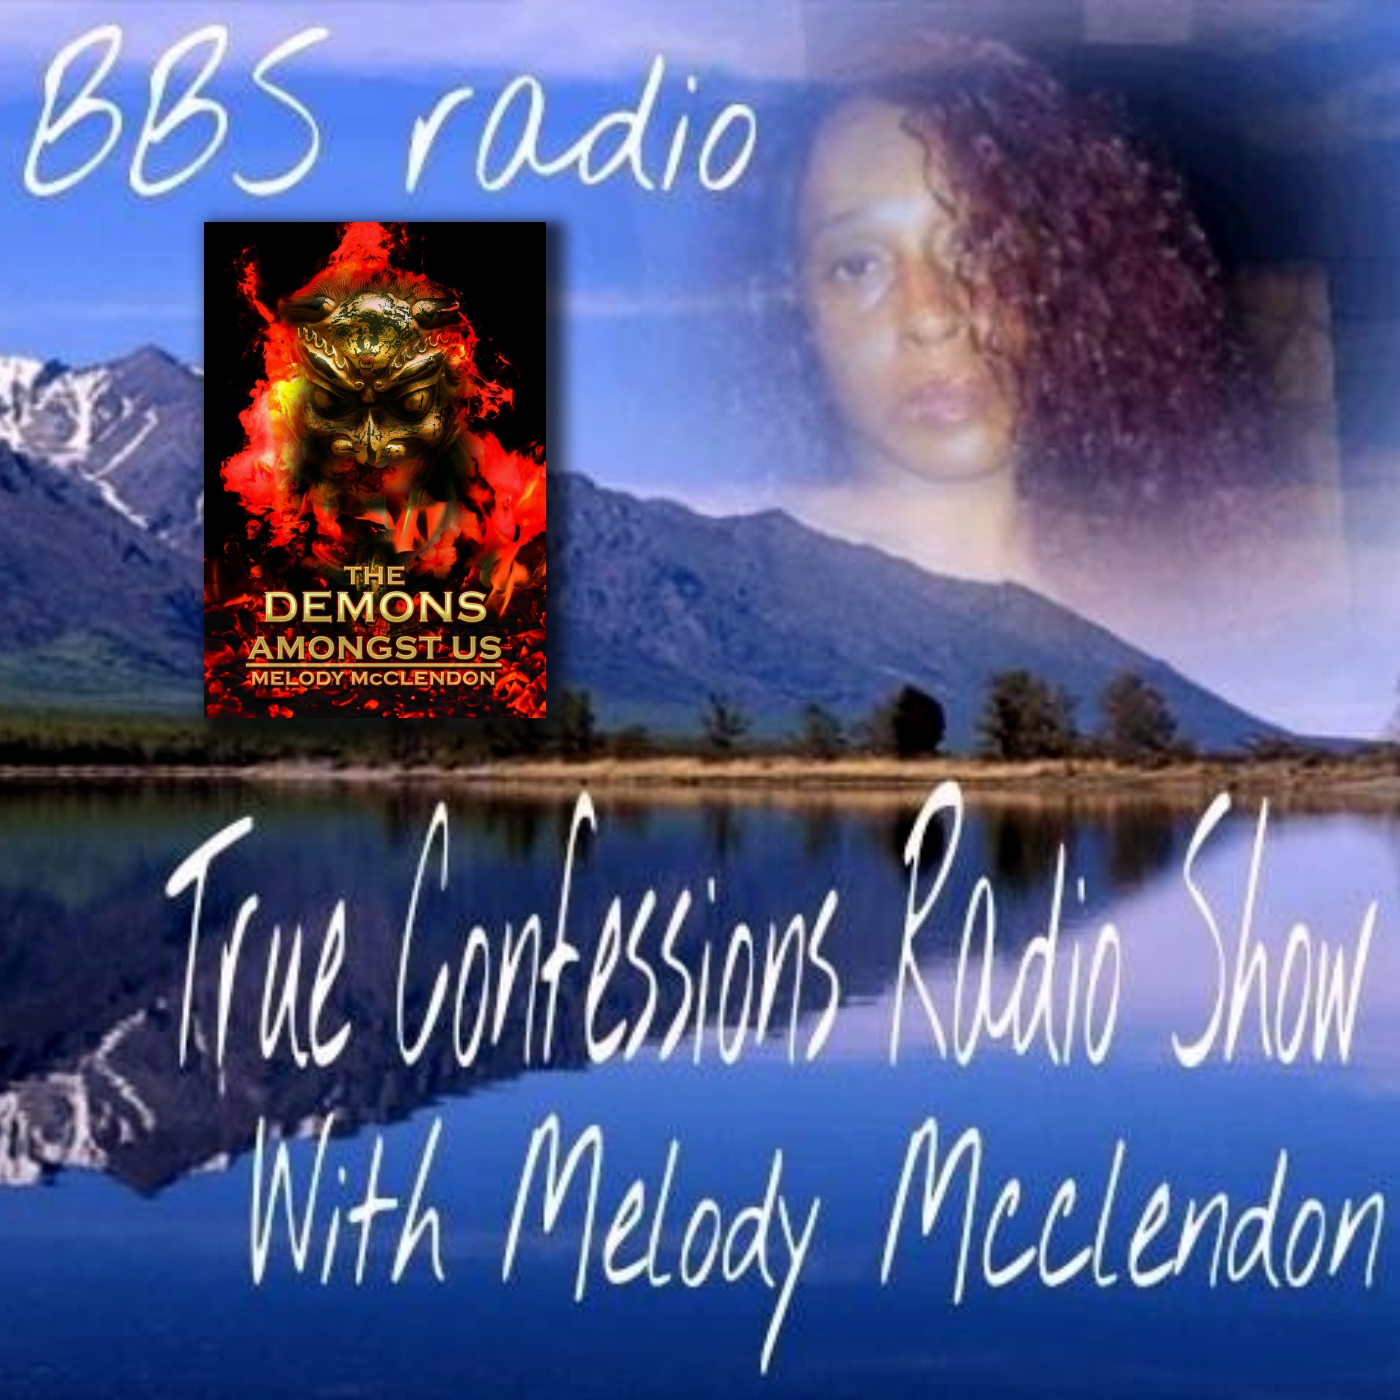 True Confessions Radio Show with Melody McClendon:BBS Radio, BBS Network Inc.